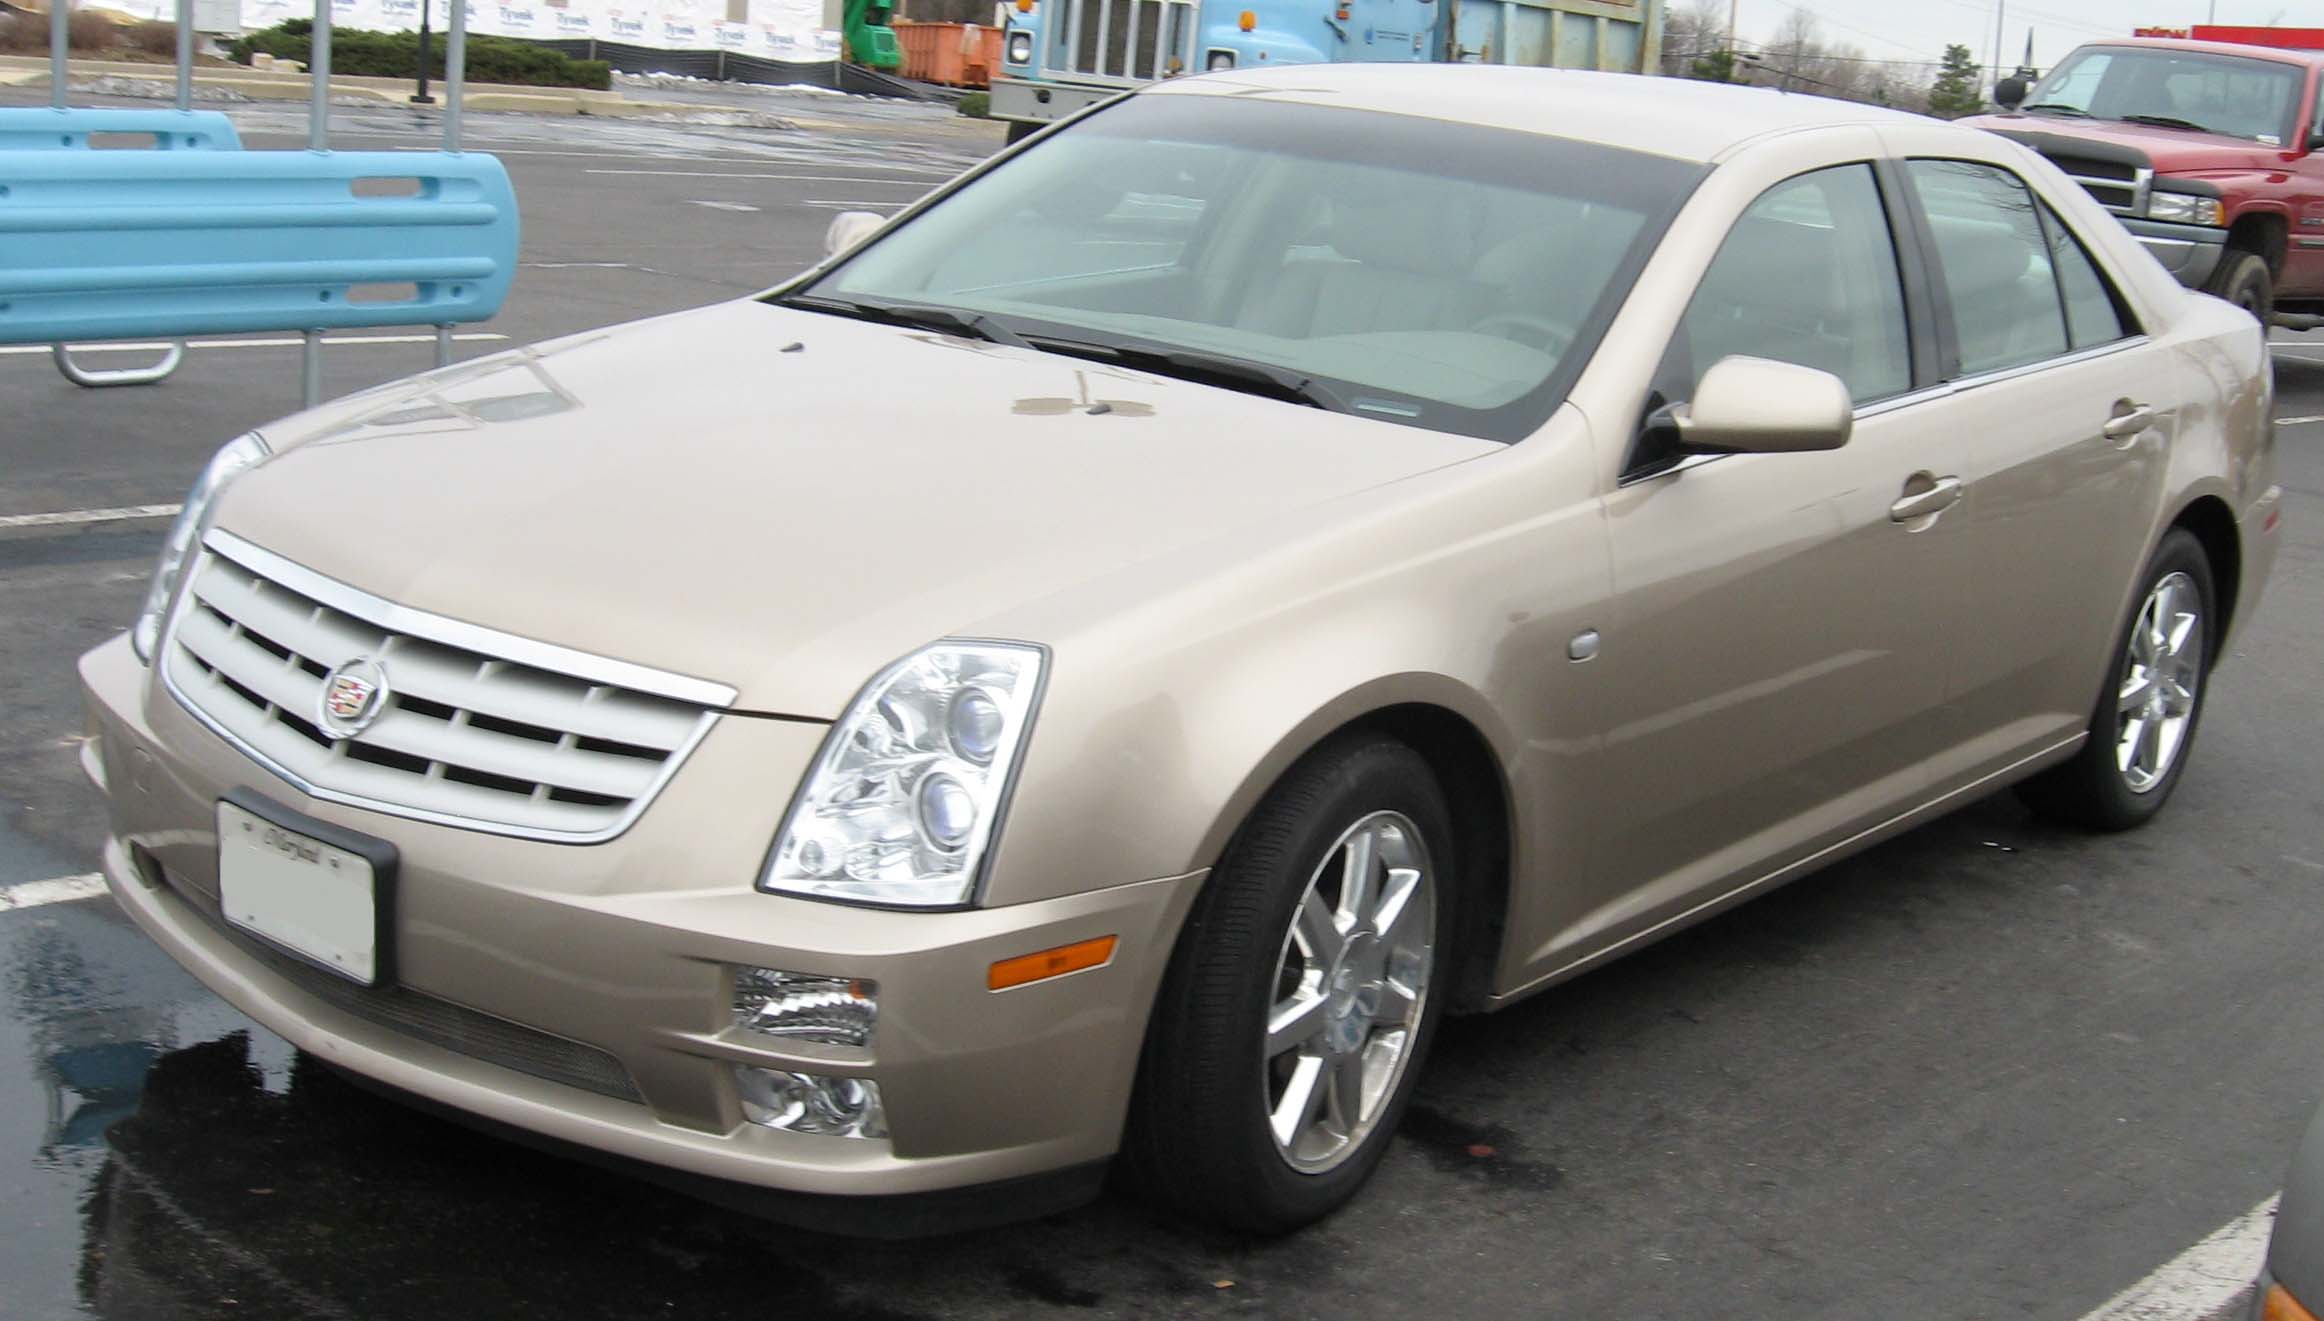 File:05-07 Cadillac STS.jpg - Wikimedia Commons